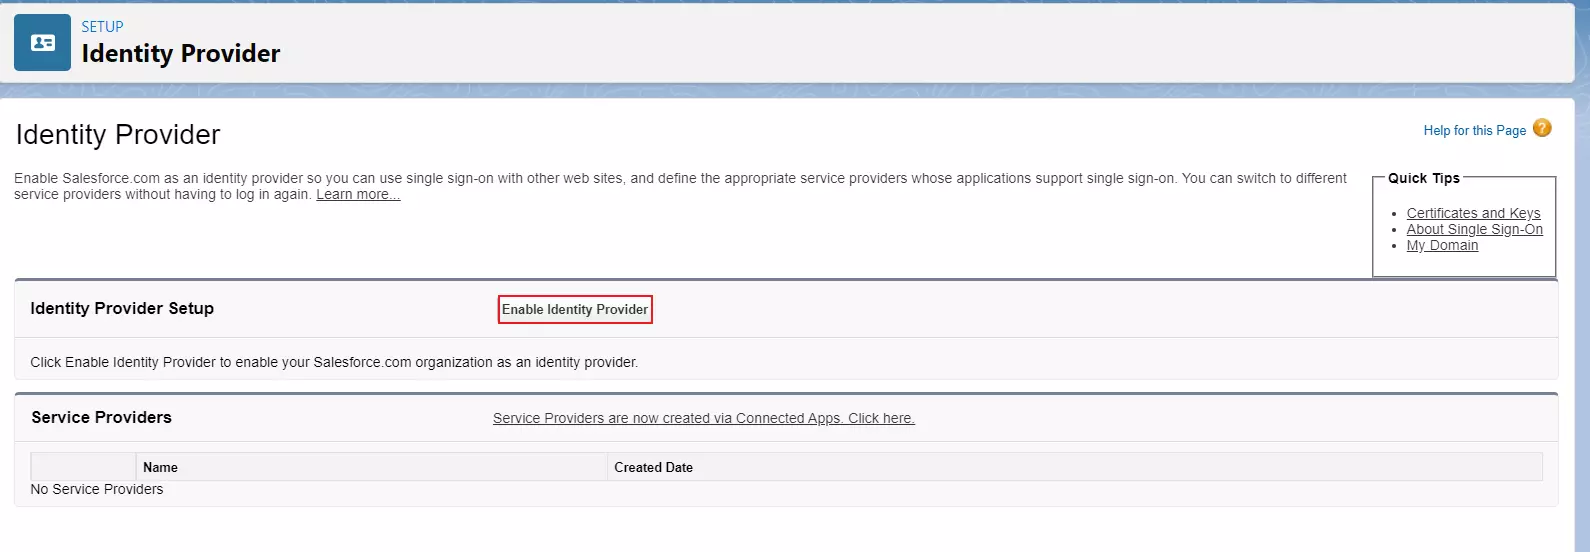 Enable IDP option to see Salesforce SAML endpoints